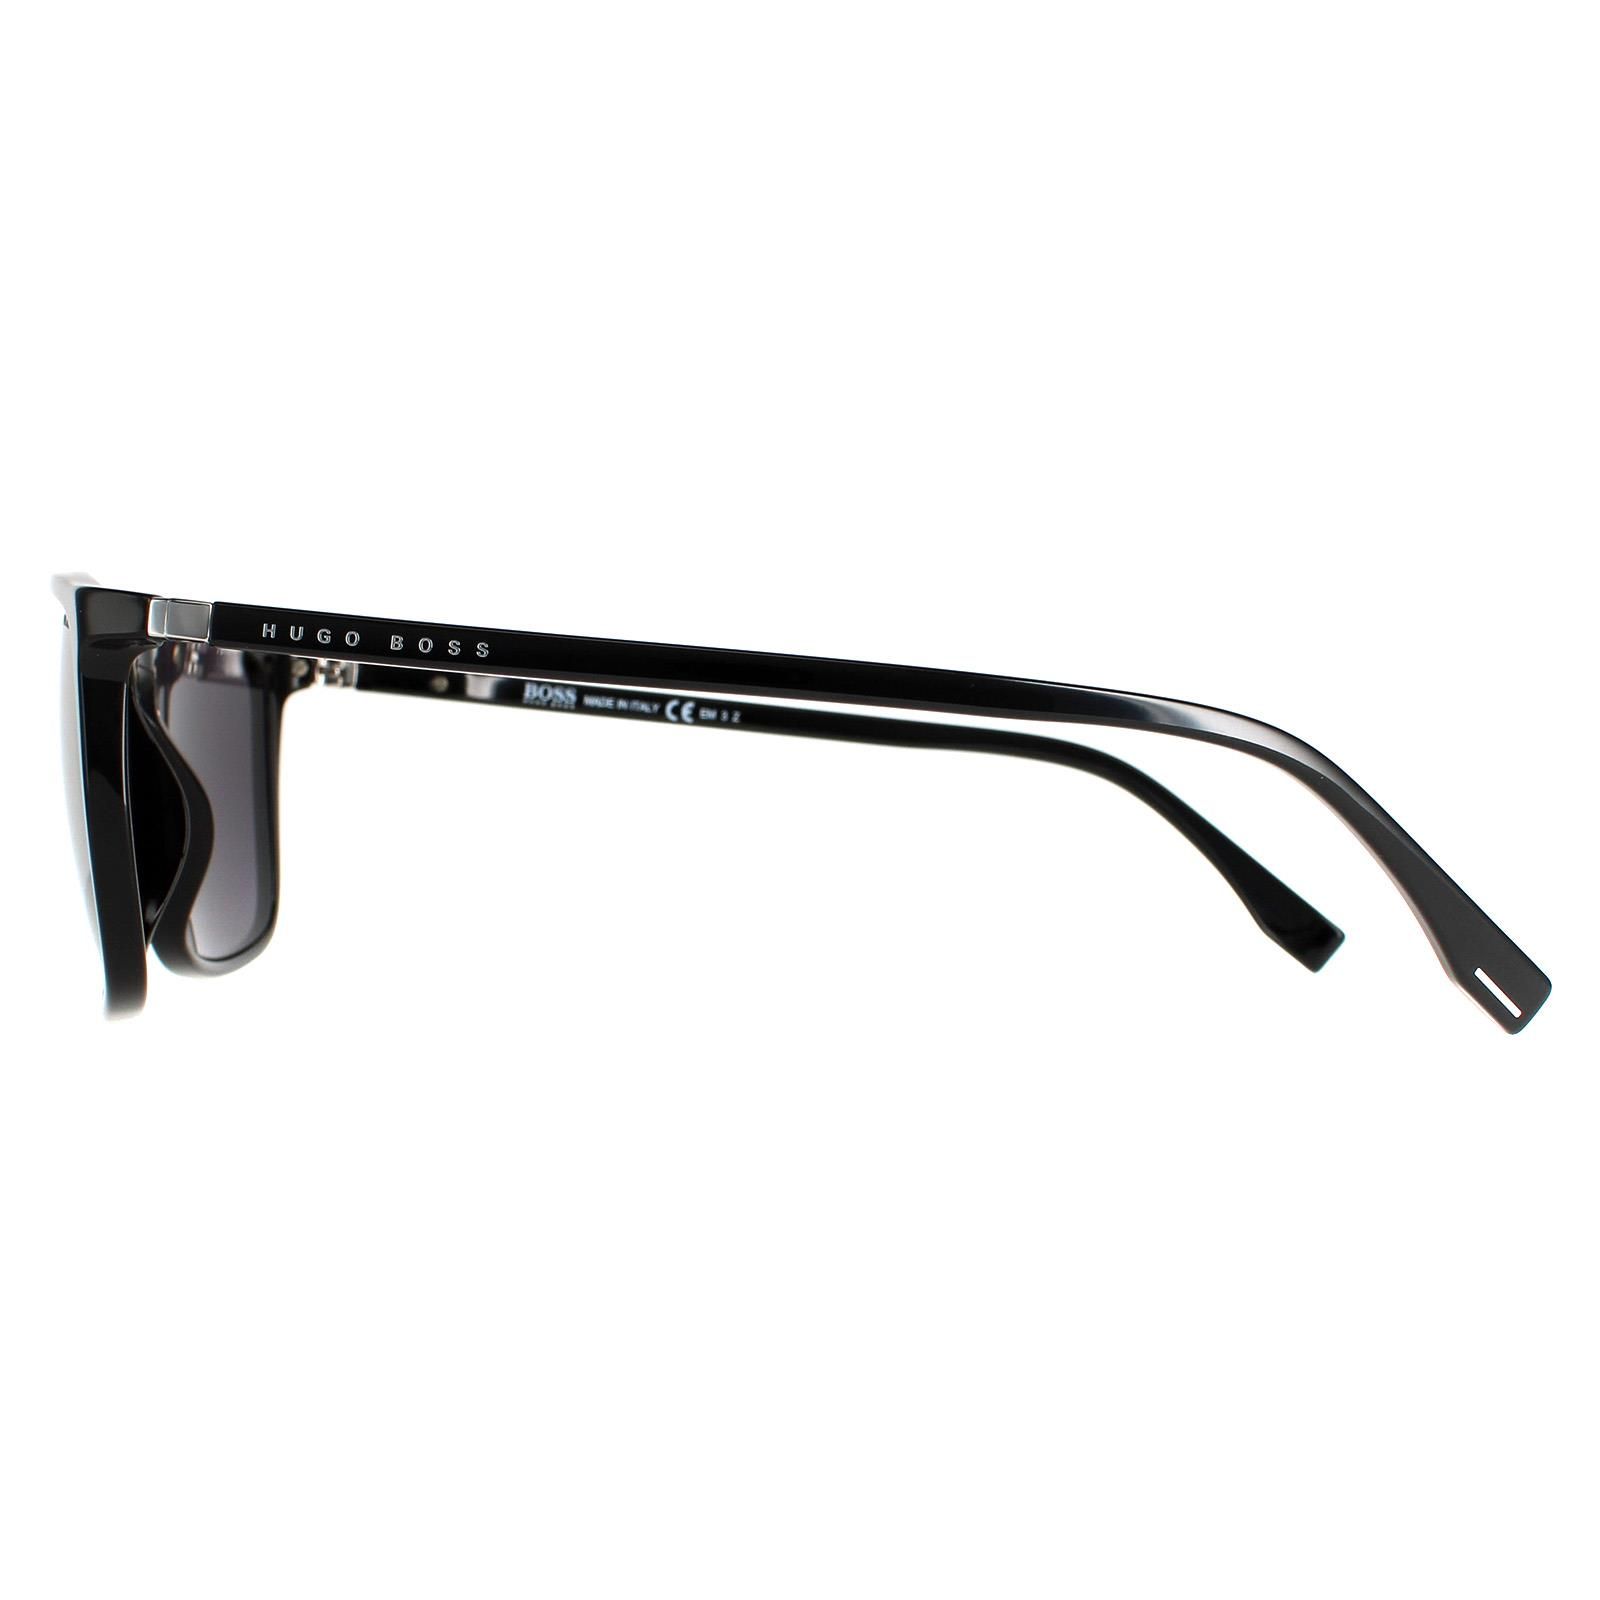 Hugo Boss Square Mens Black Grey Polarized BOSS 0665/S/IT  Hugo Boss are made in Italy and have a rectangular shape with a slim slight keyhole shape to the bridge. The temples are enhanced with a colour logo plaque on top of the resin frame which has hypoallergenic properties. An integrated hinge and core wire give durability and quality as expected from a name such as Hugo Boss.